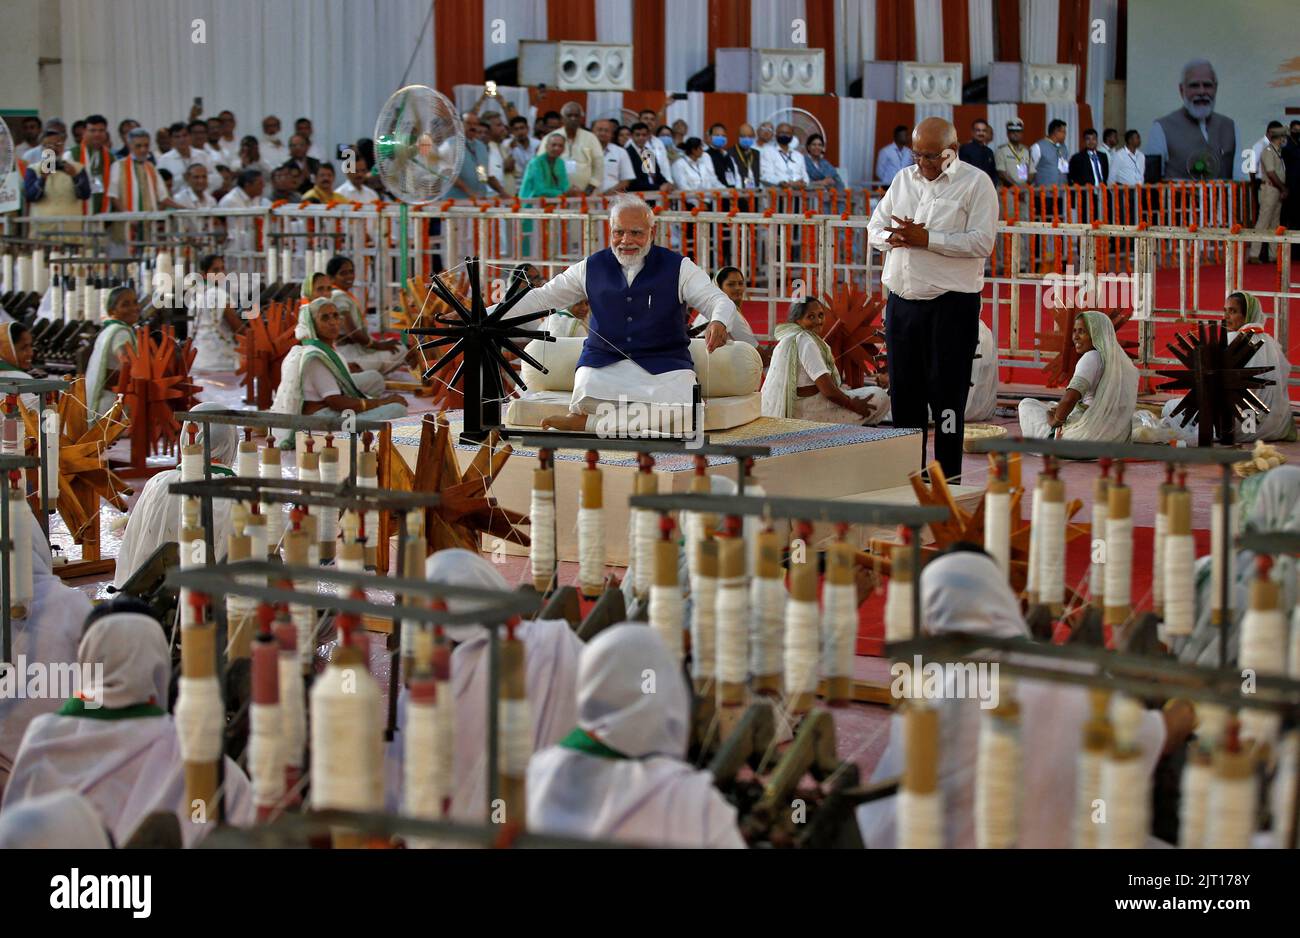 India's Prime Minister Narendra Modi spins cotton on a wheel as Chief Minister of Gujarat Bhupendra Patel looks on during an event where 7500 artisans spin cotton live at same place to promote hand woven cotton cloth as part of the celebrations commemorating 75 years of India's Independence, in Ahmedabad, India, August 27, 2022. REUTERS/Amit Dave Stock Photo